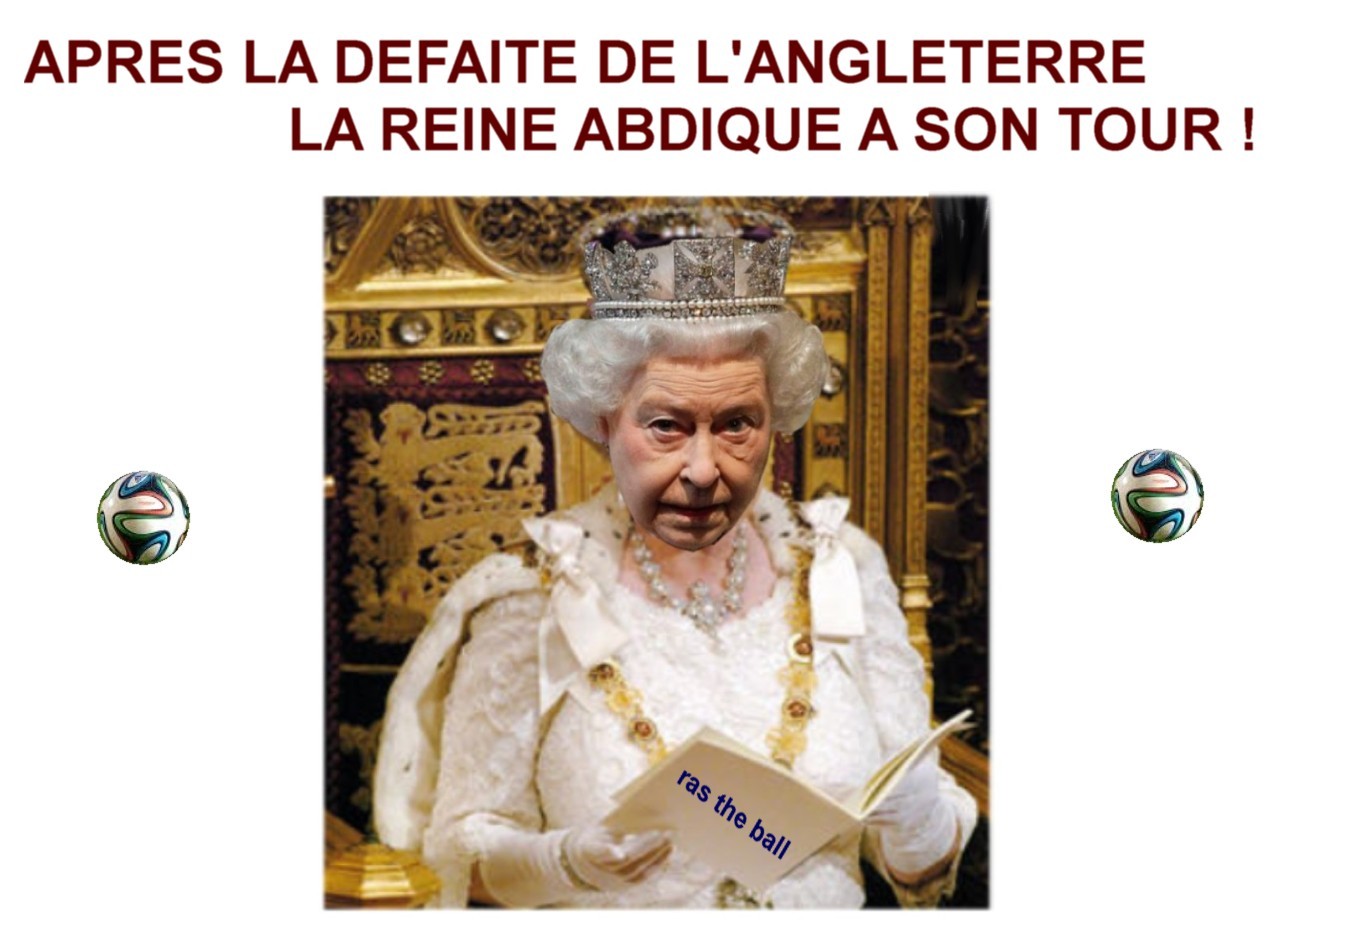 
               Meilleures image drole  DIEU HAS NOT SAVED THE QUEEN ! 
              